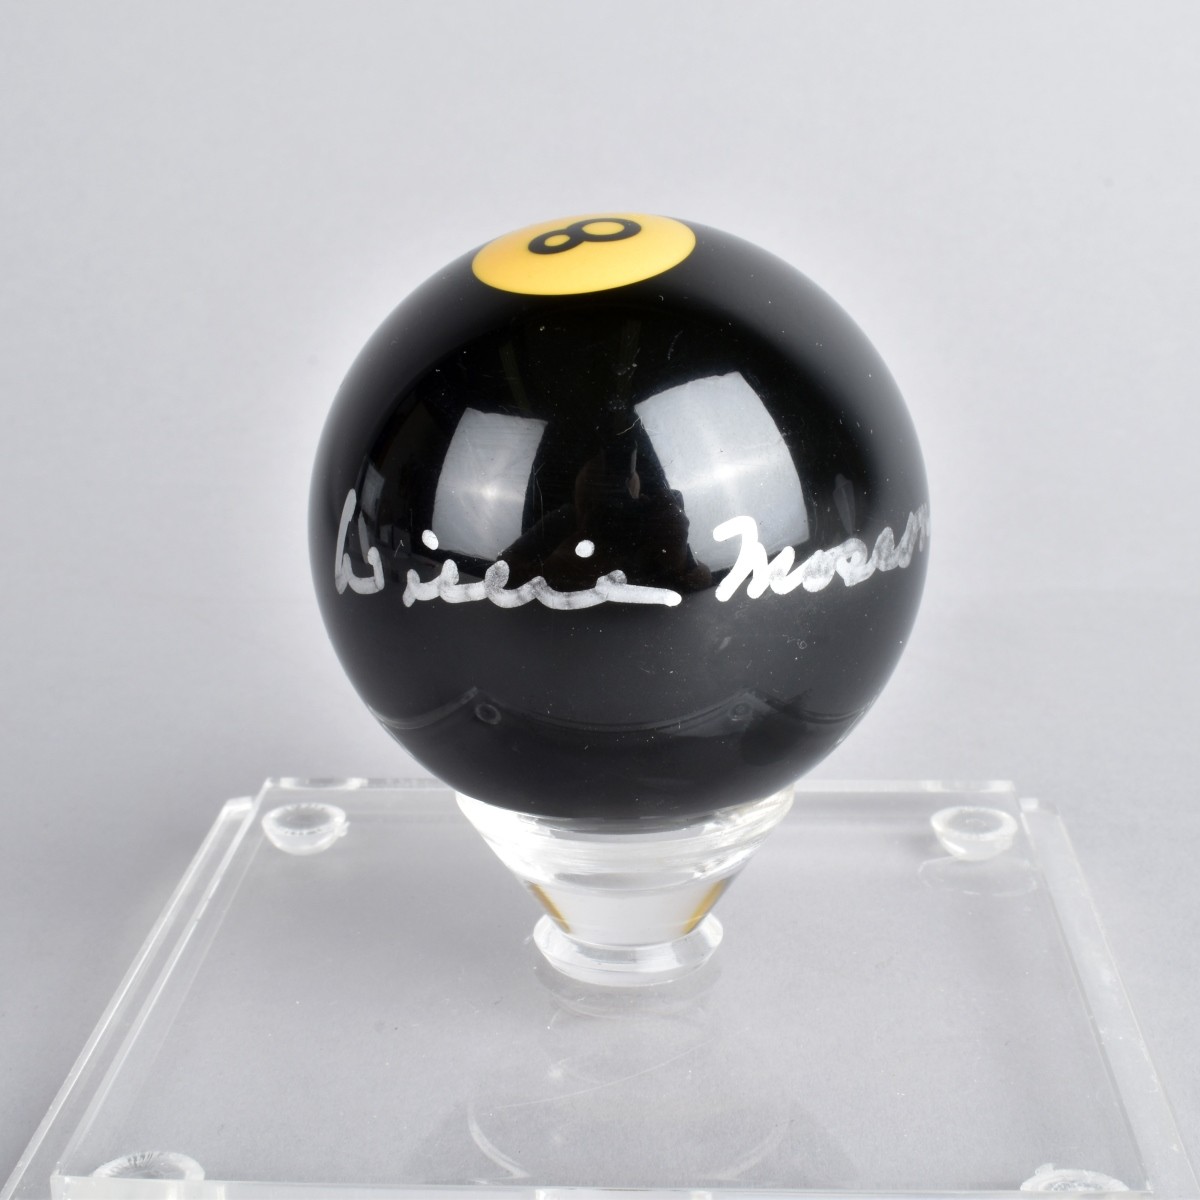 Willie Mosconi Autographed 8-Ball BC Billiards